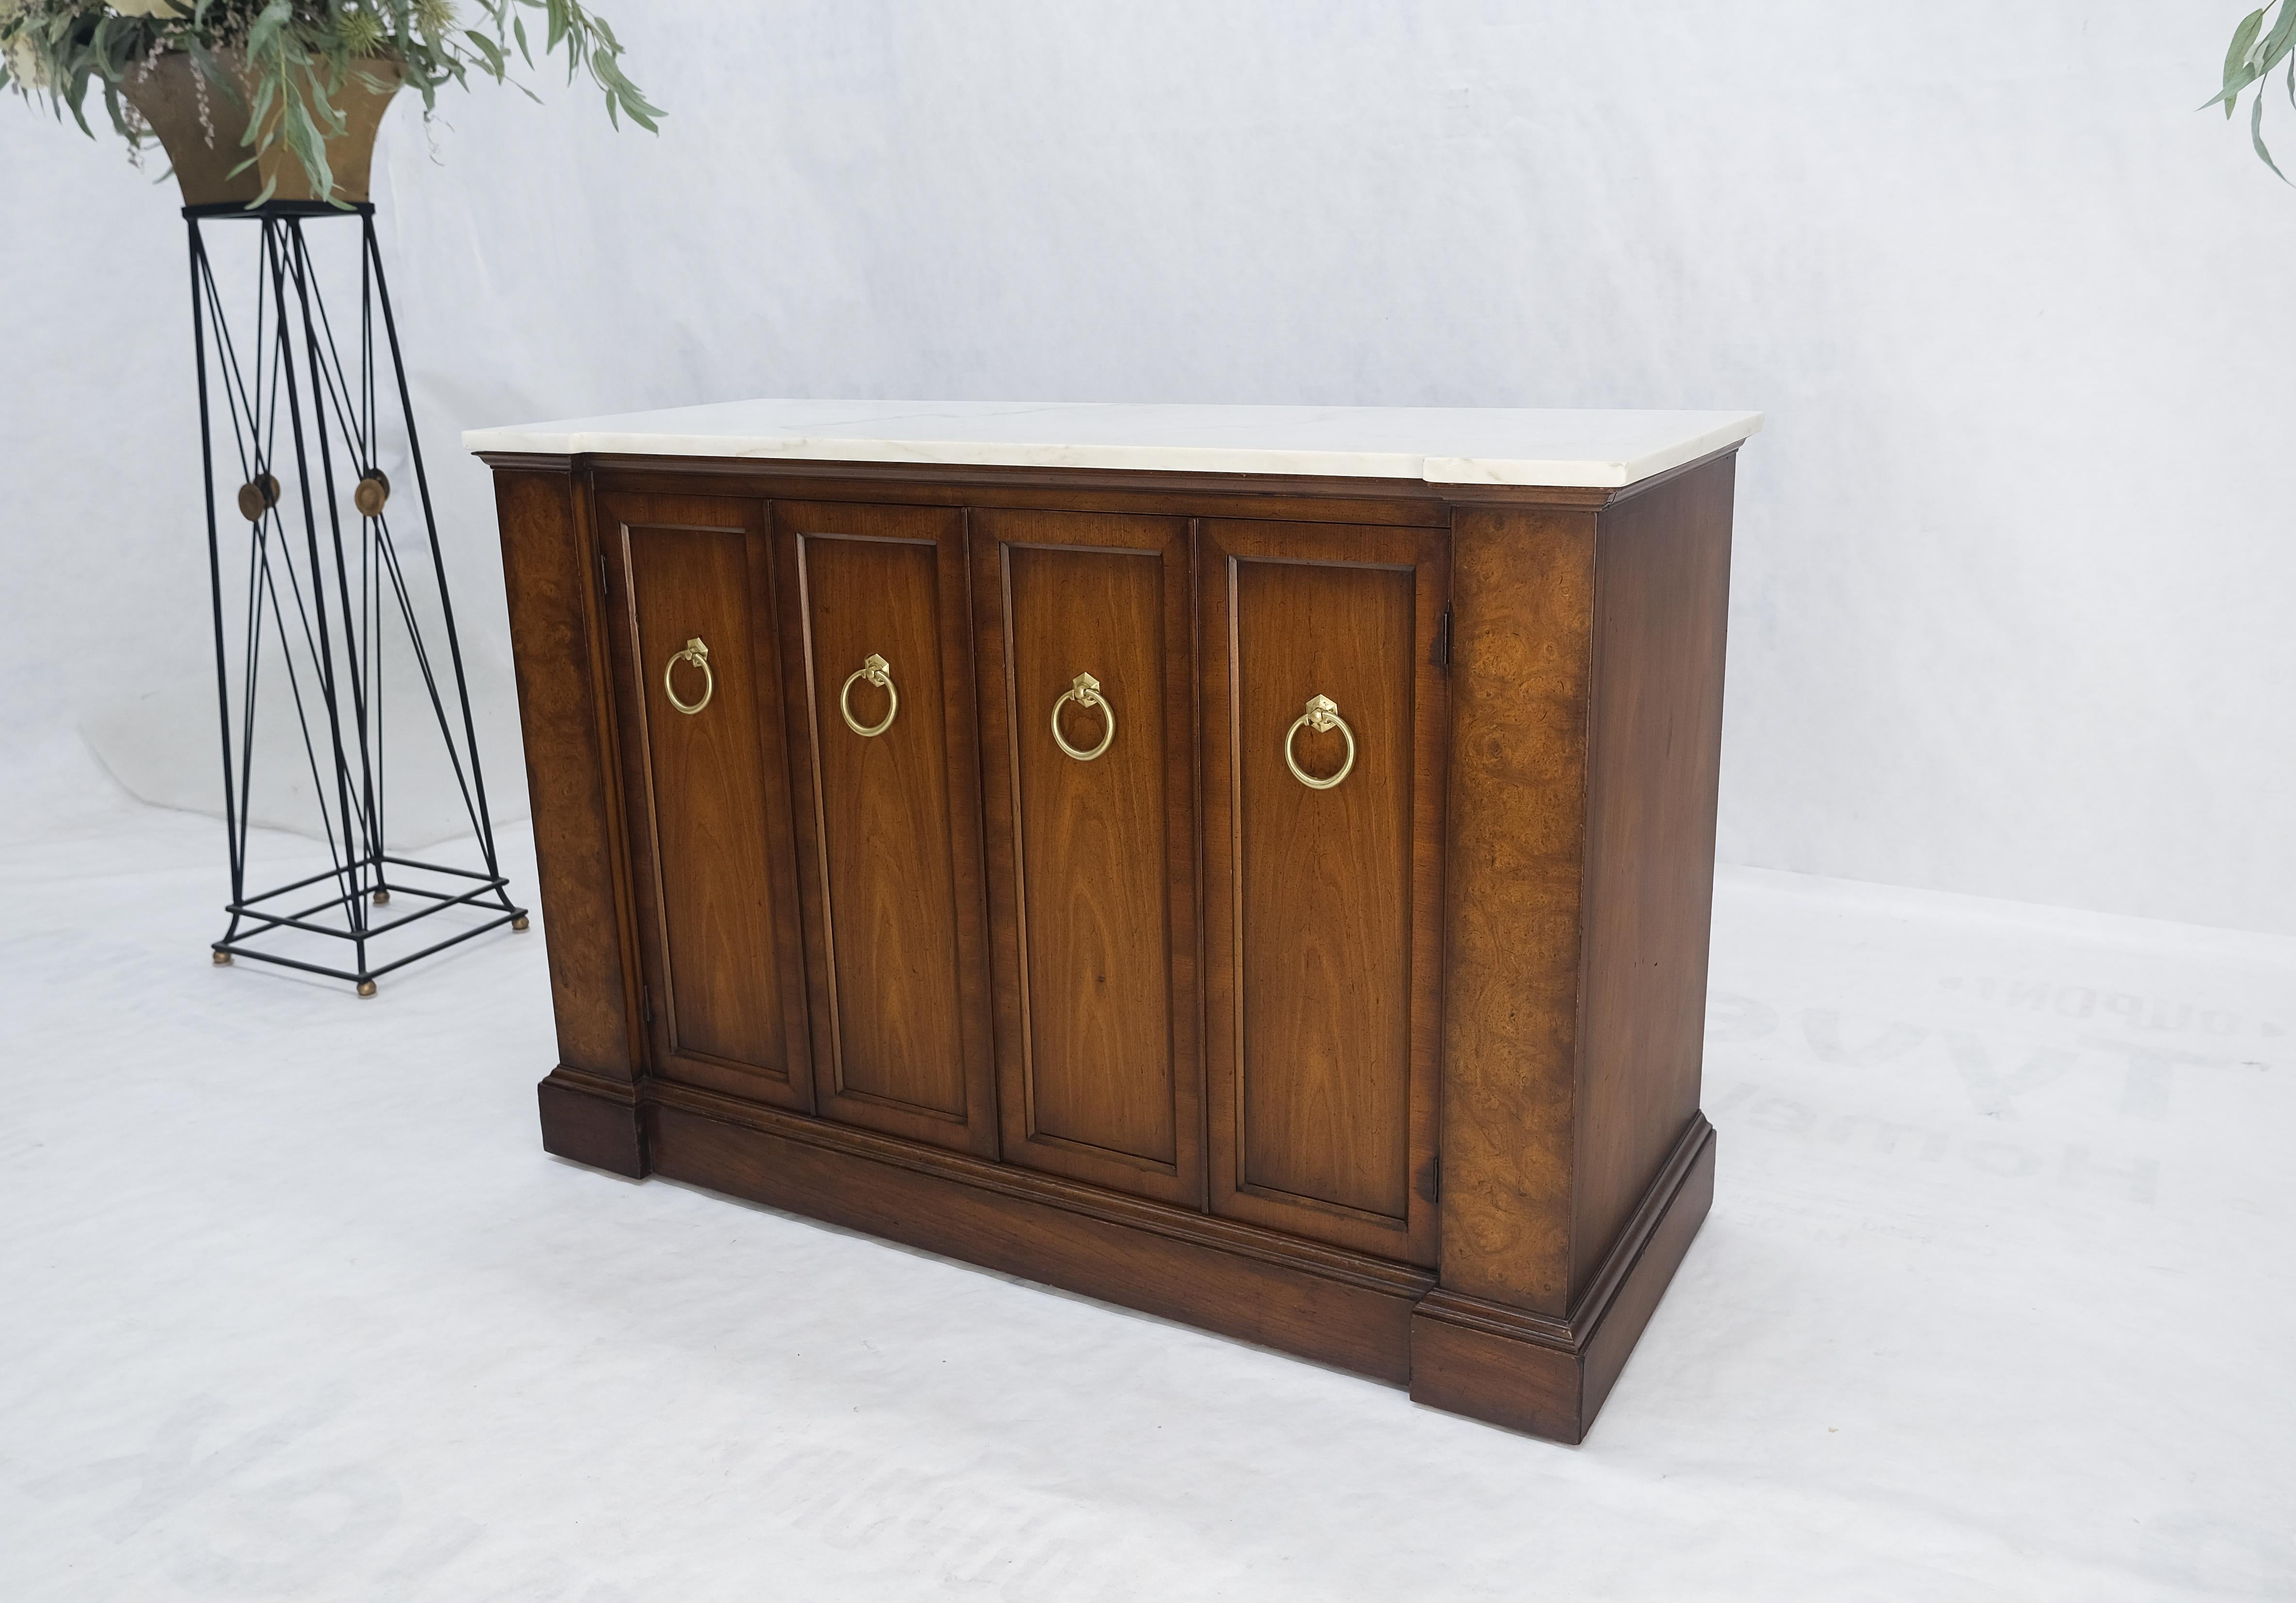 20th Century Marble Top Round Brass Ring Drop Pulls Hardware Burl Wood Double Door Credenza For Sale